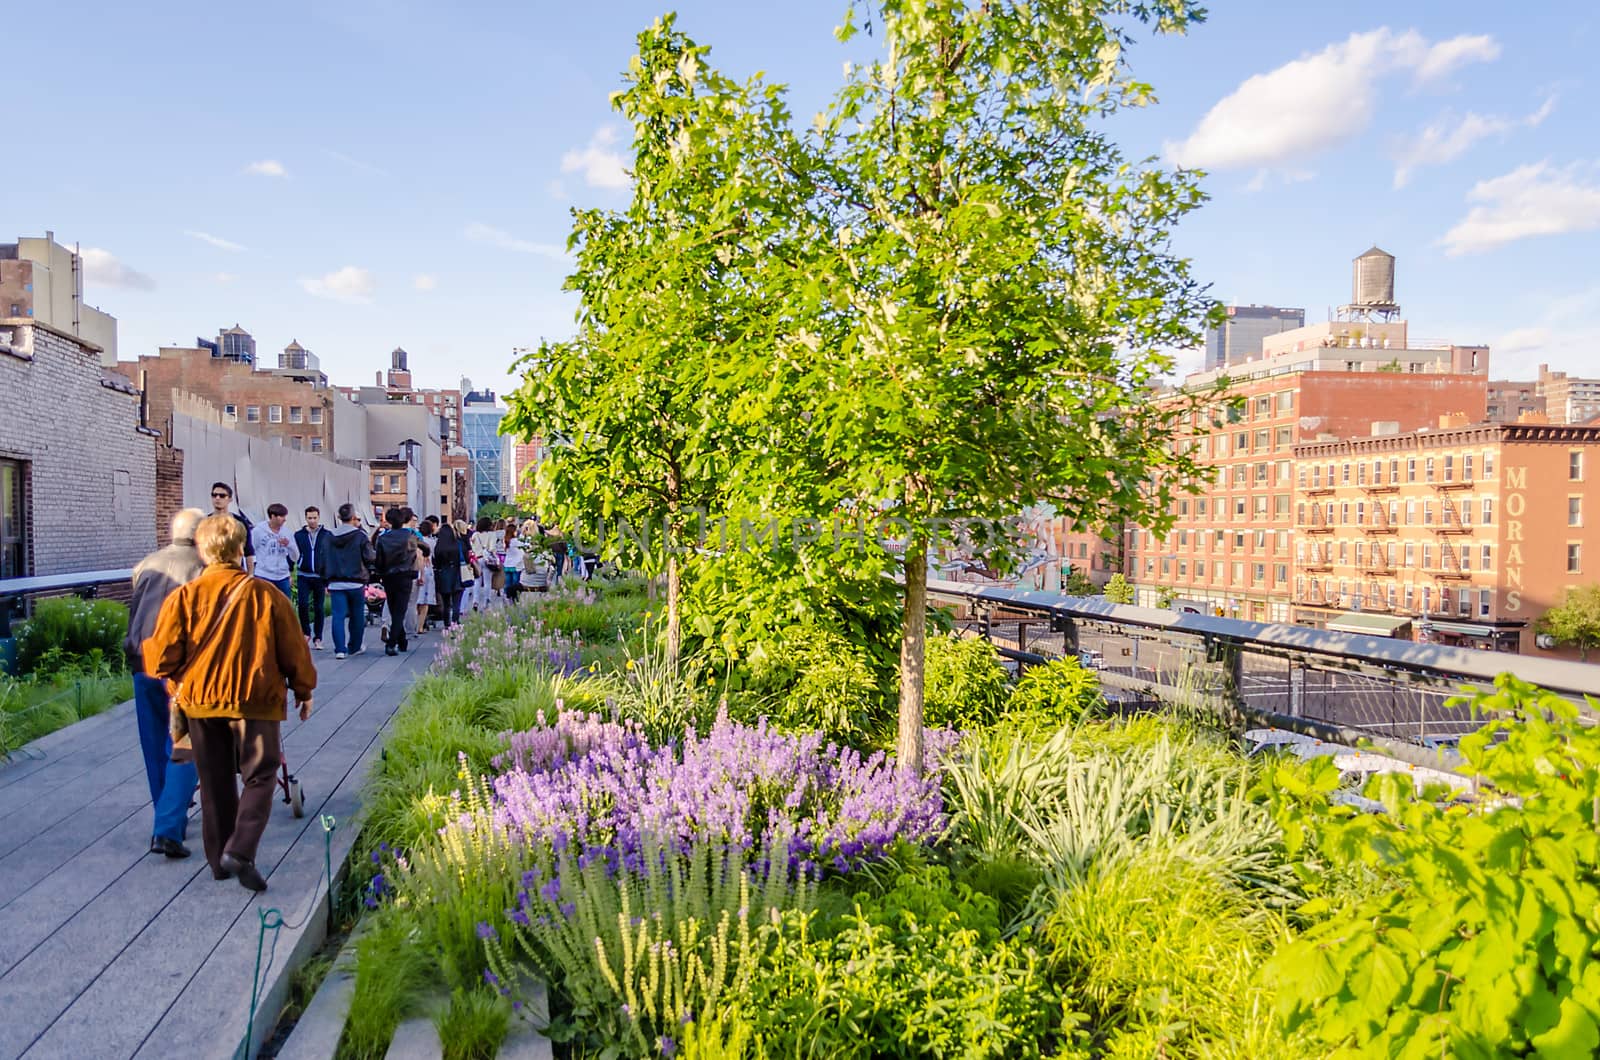 NEW YORK - CIRCA MAY 2013: The High Line Park, New York, circa May 2013. The High Line is a popular linear park built on the elevated train tracks above Tenth Ave in New York City.